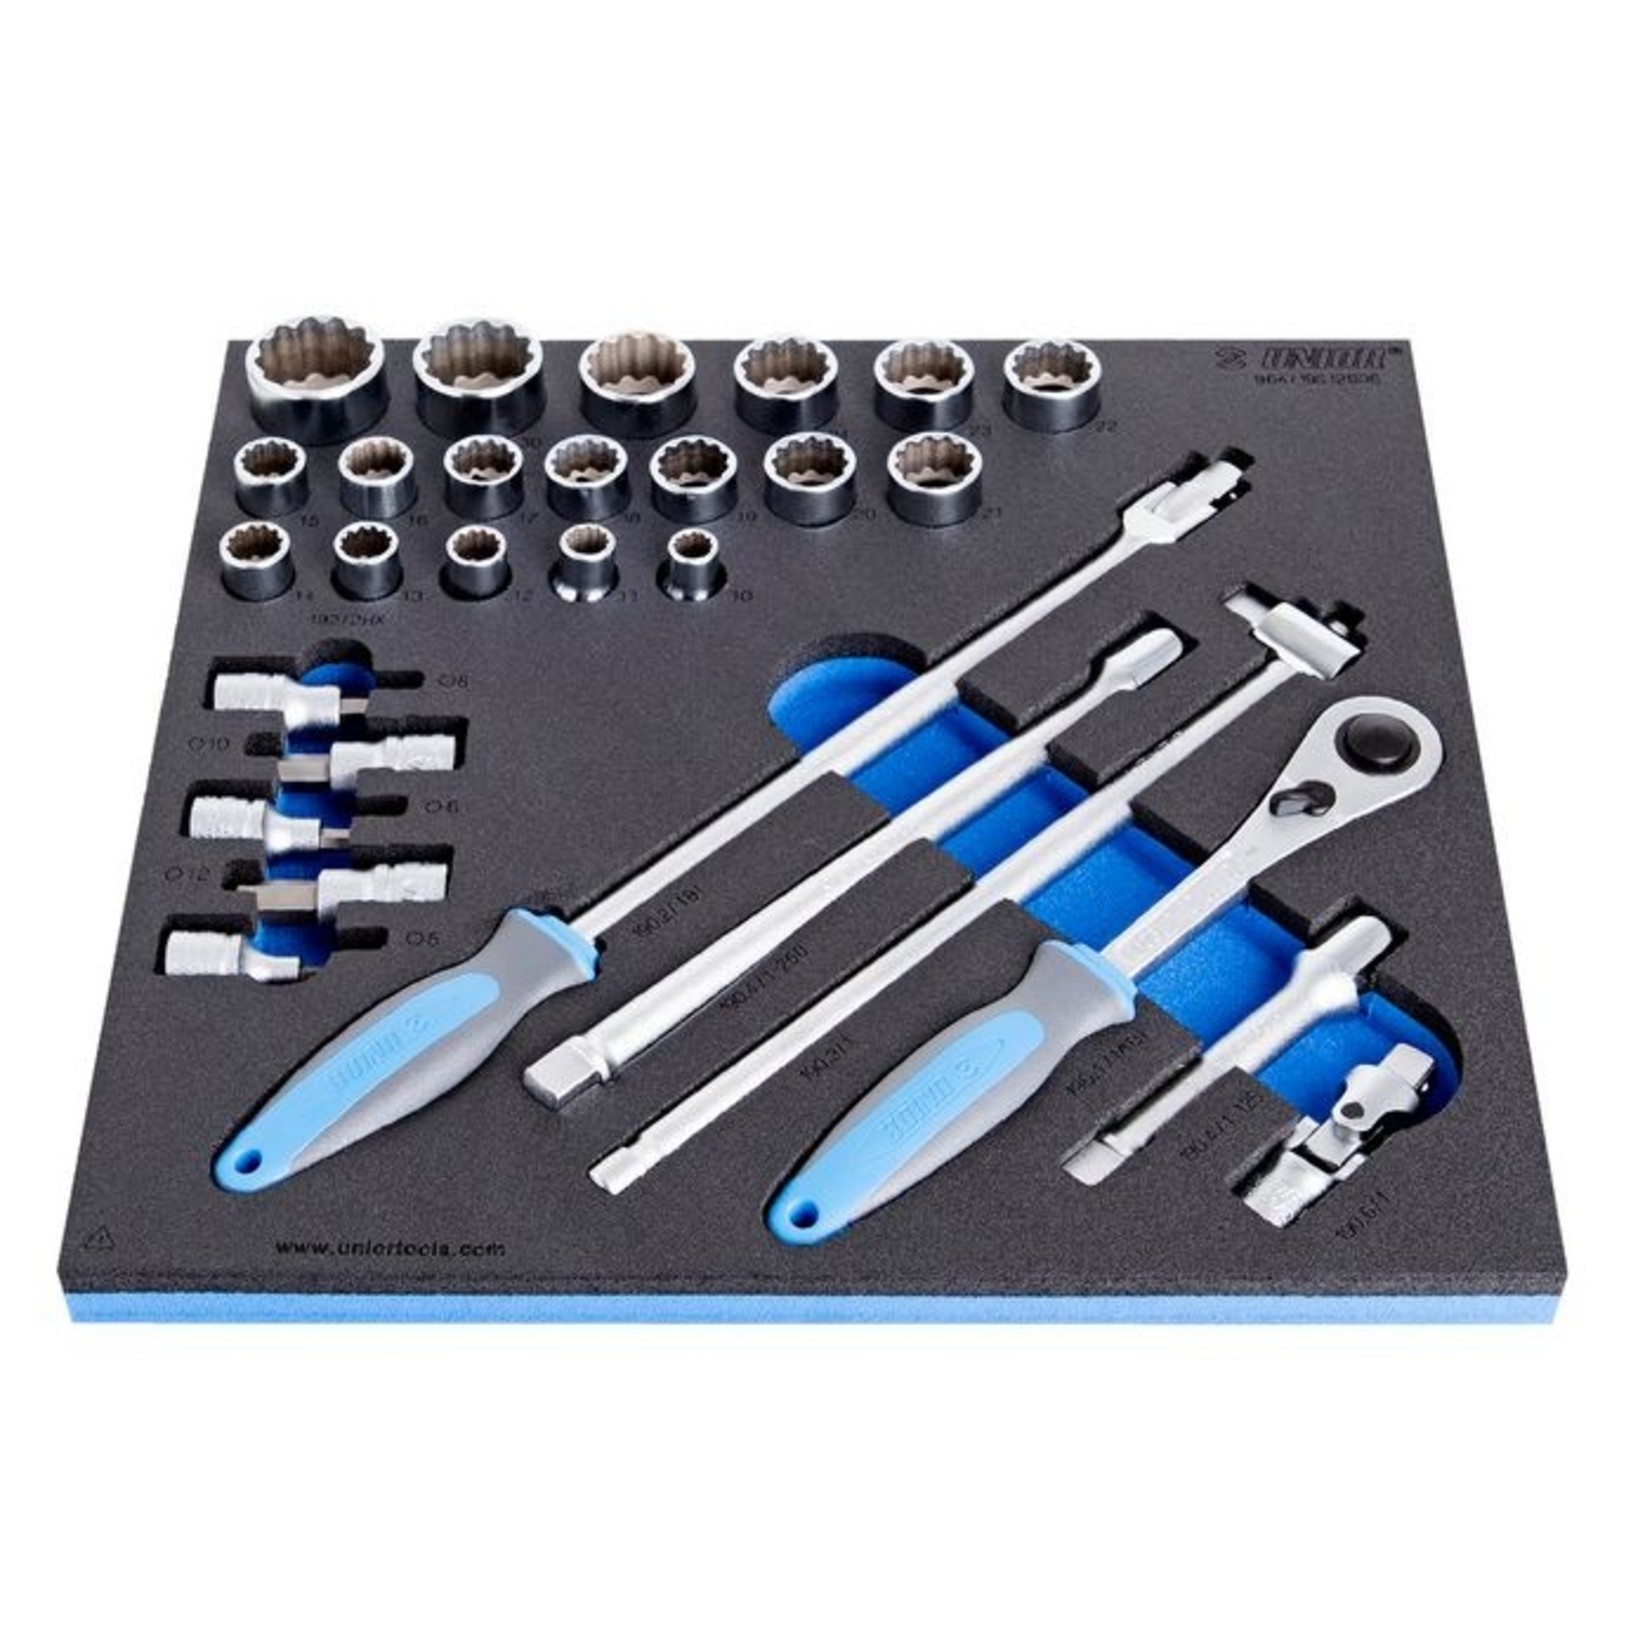 unior Unior Set Of Sockets 1/2" In Sos Tool Tray 621186 Professional Bicycle Tool